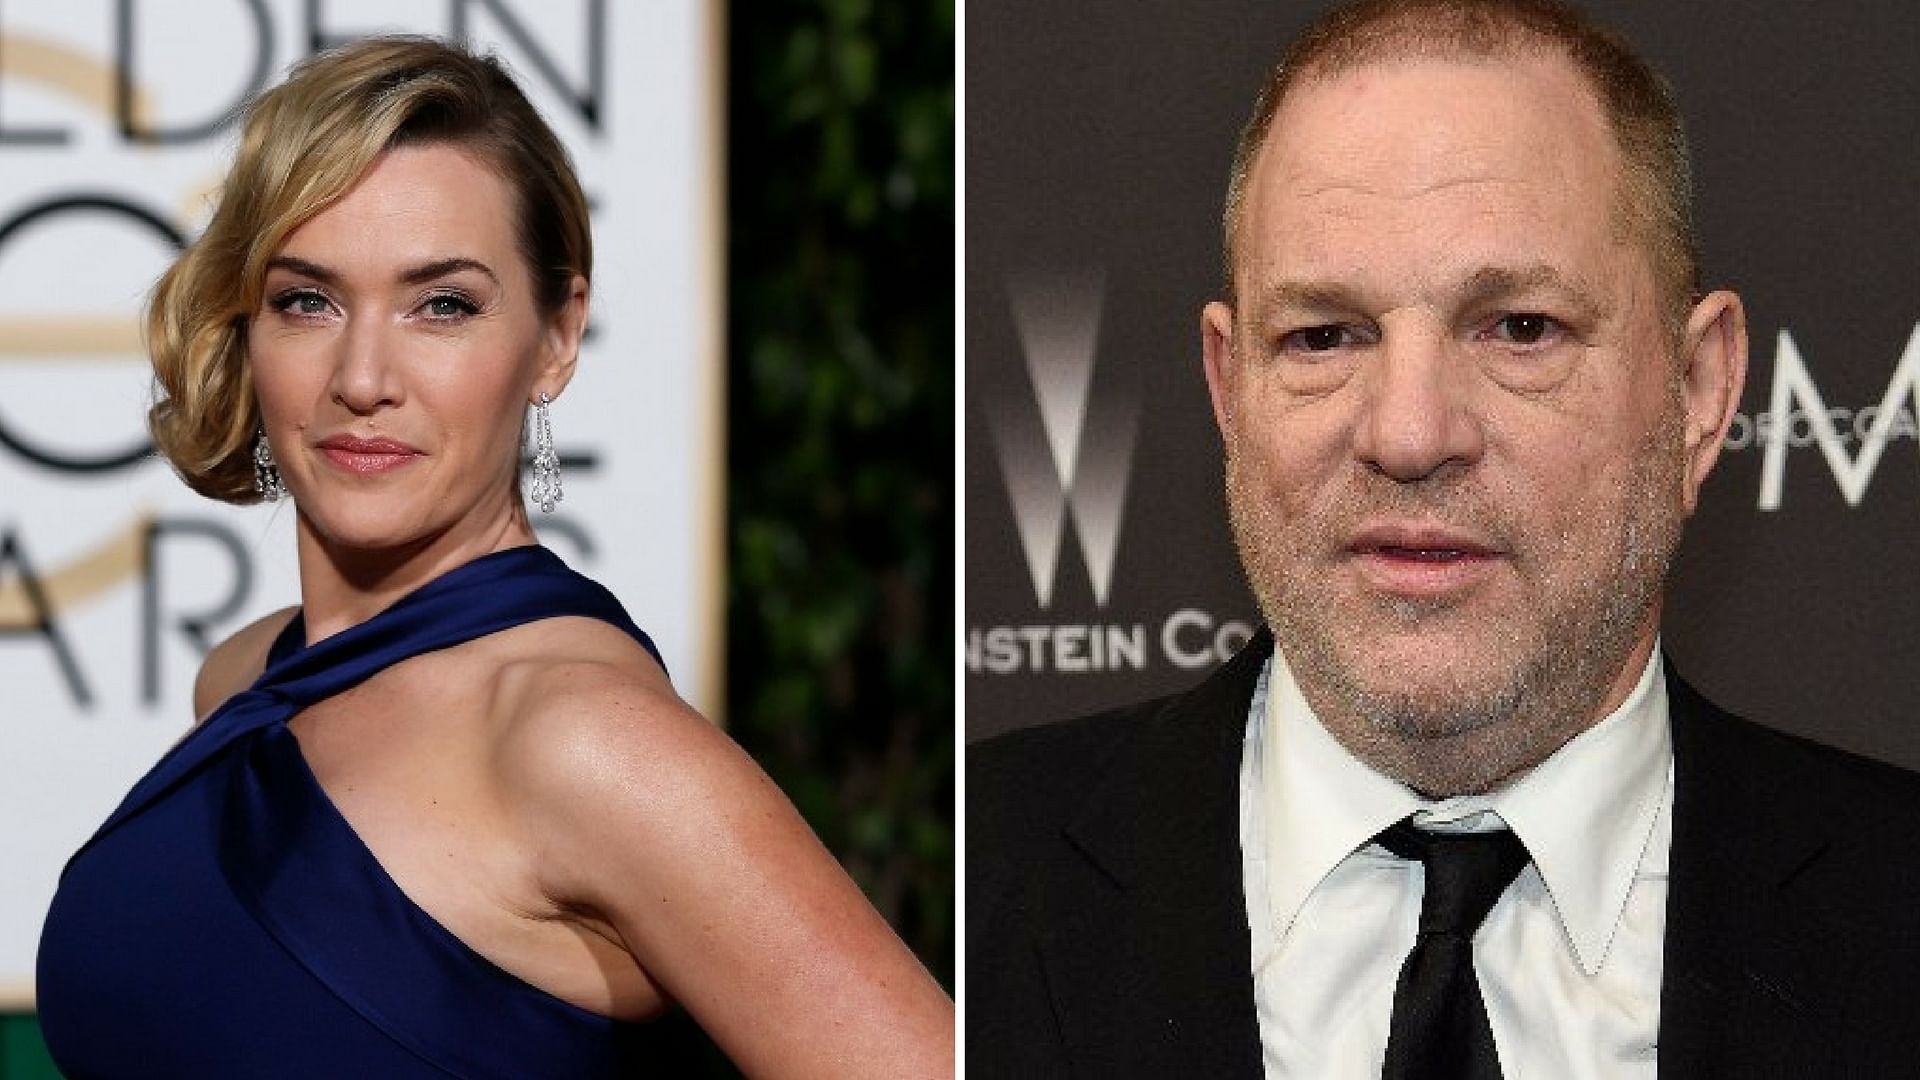 Kate Winslet talks about the nature of her encounters with Harvey Weinstein.